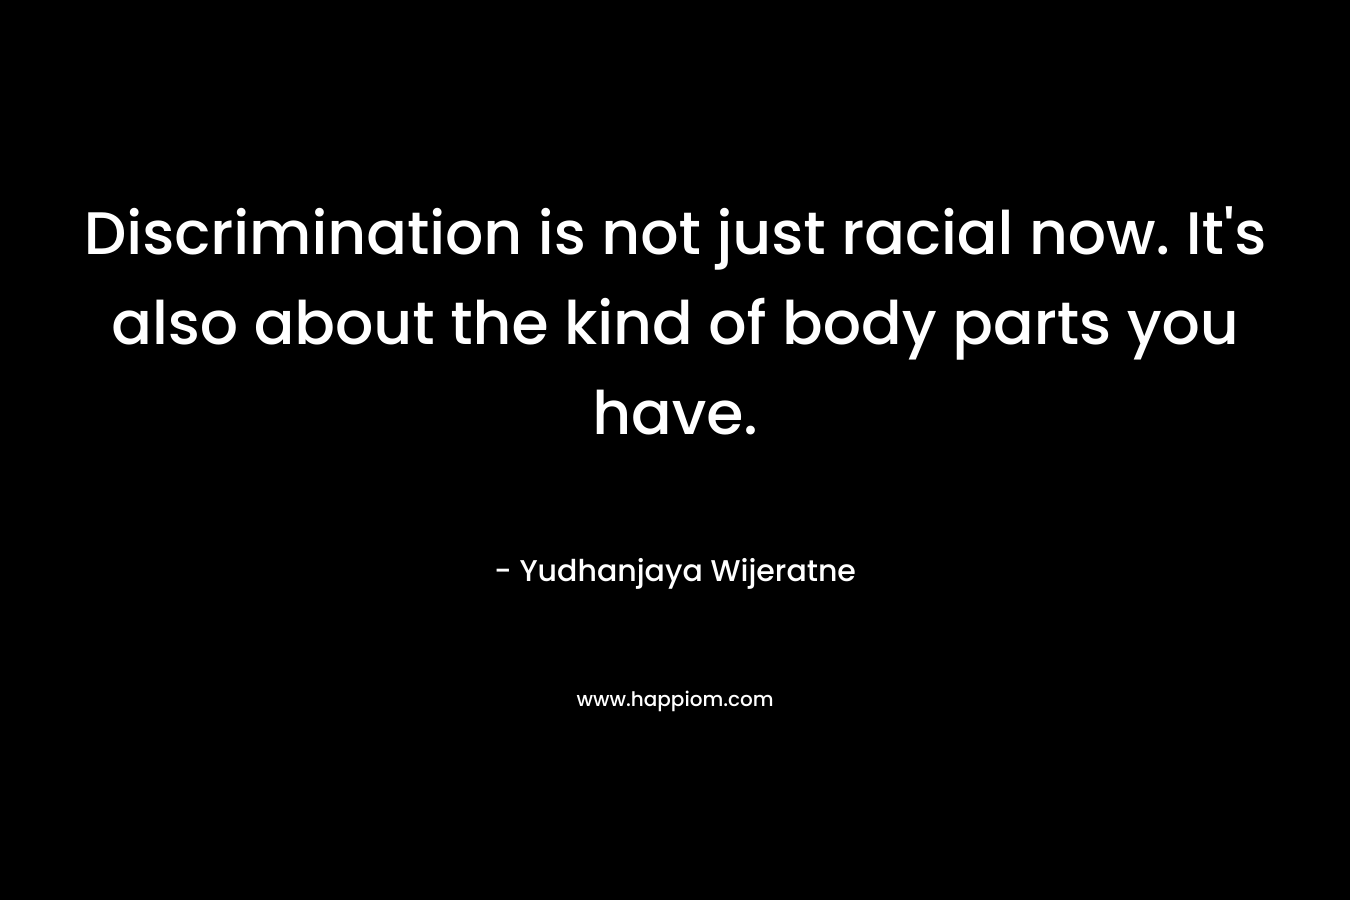 Discrimination is not just racial now. It's also about the kind of body parts you have.